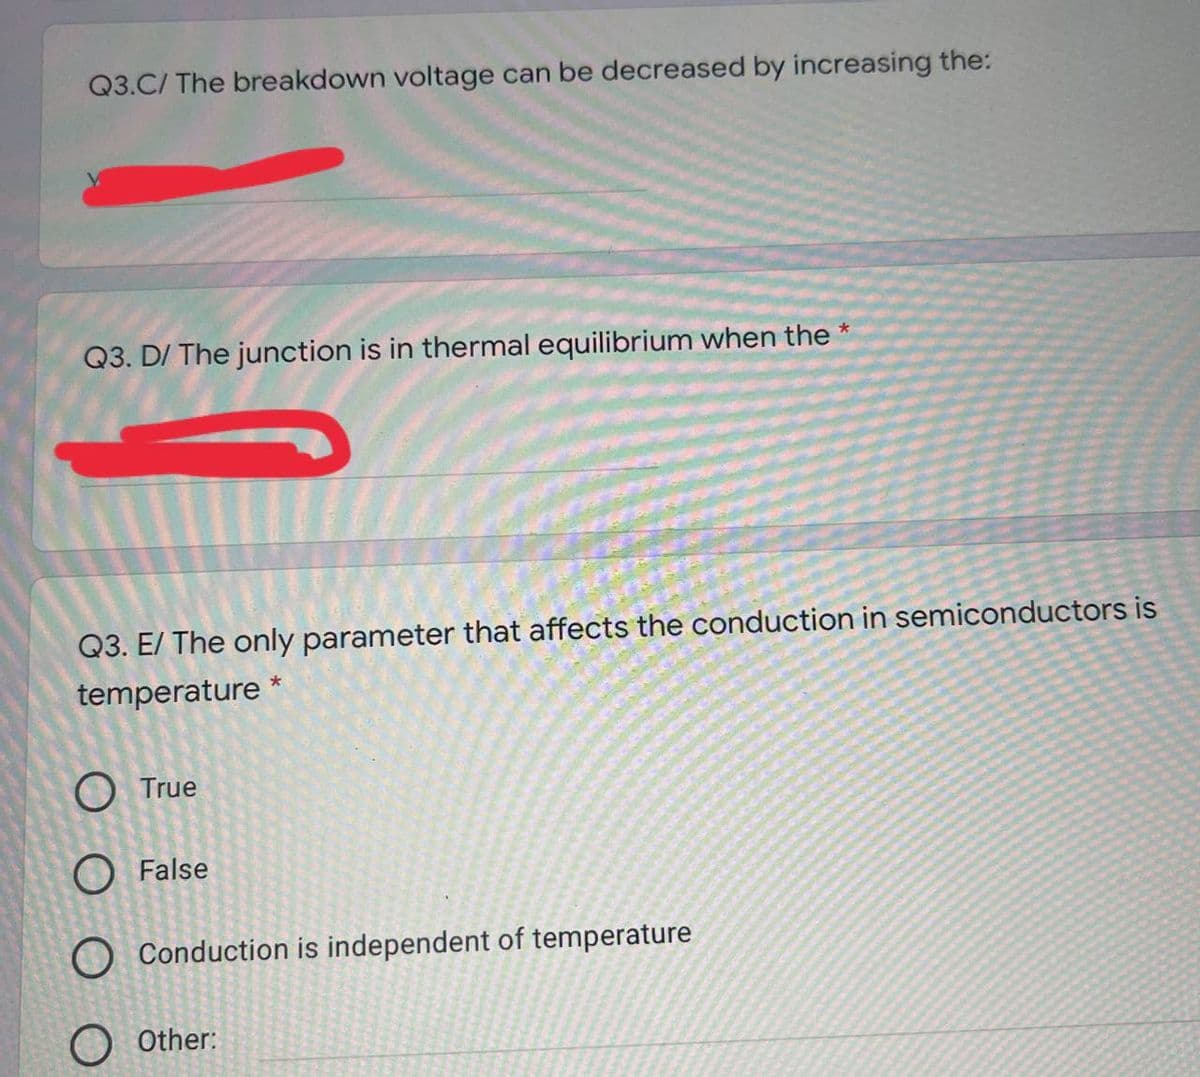 Q3.C/ The breakdown voltage can be decreased by increasing the:
Q3. D/ The junction is in thermal equilibrium when the *
Q3. E/ The only parameter that affects the conduction in semiconductors is
temperature *
O True
O False
O Conduction is independent of temperature
O Other:
